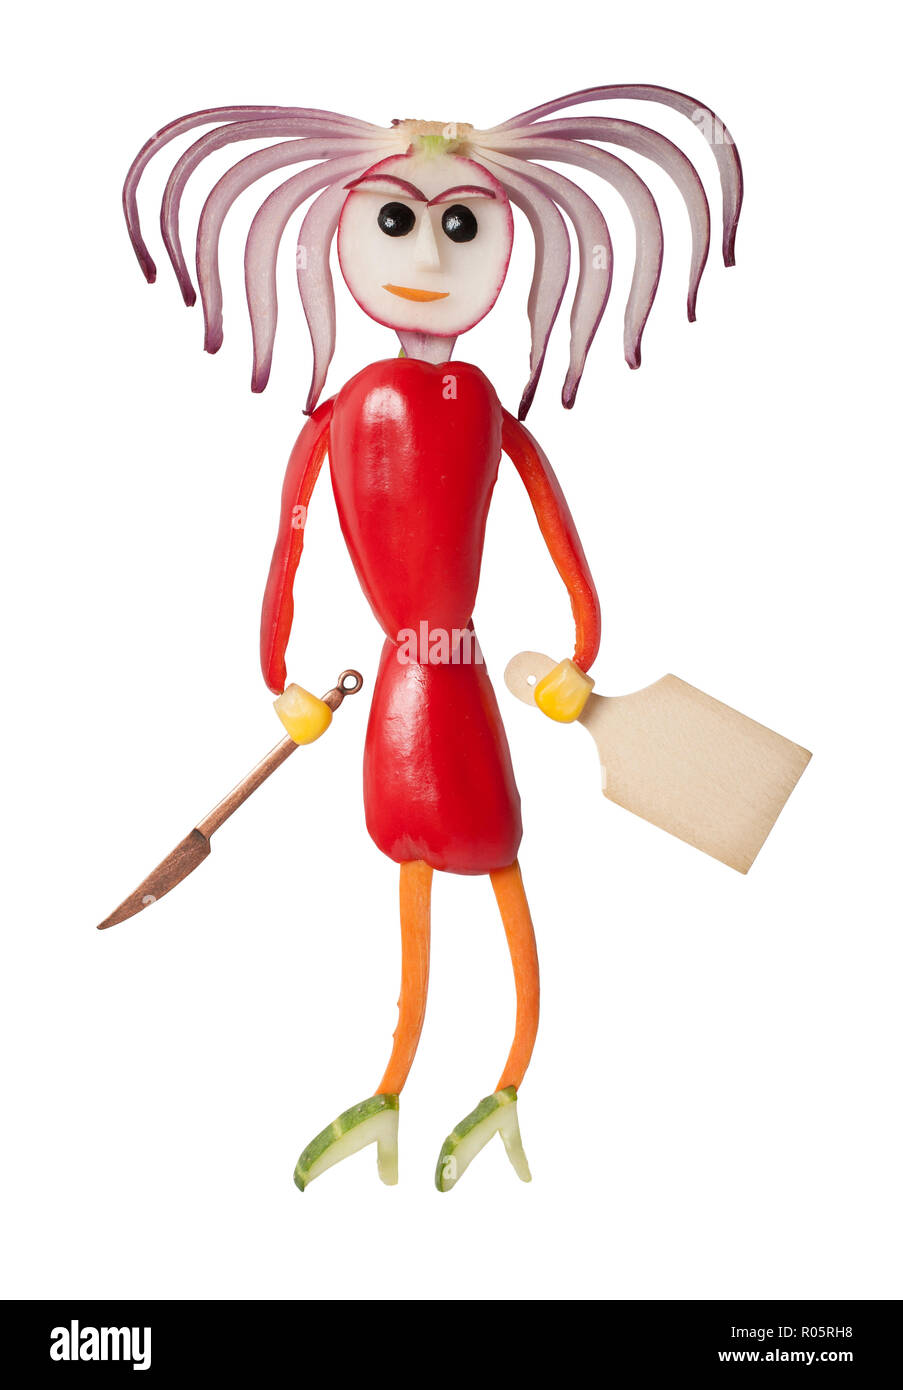 Girl made with vegetables holding knife and cutting board Stock Photo